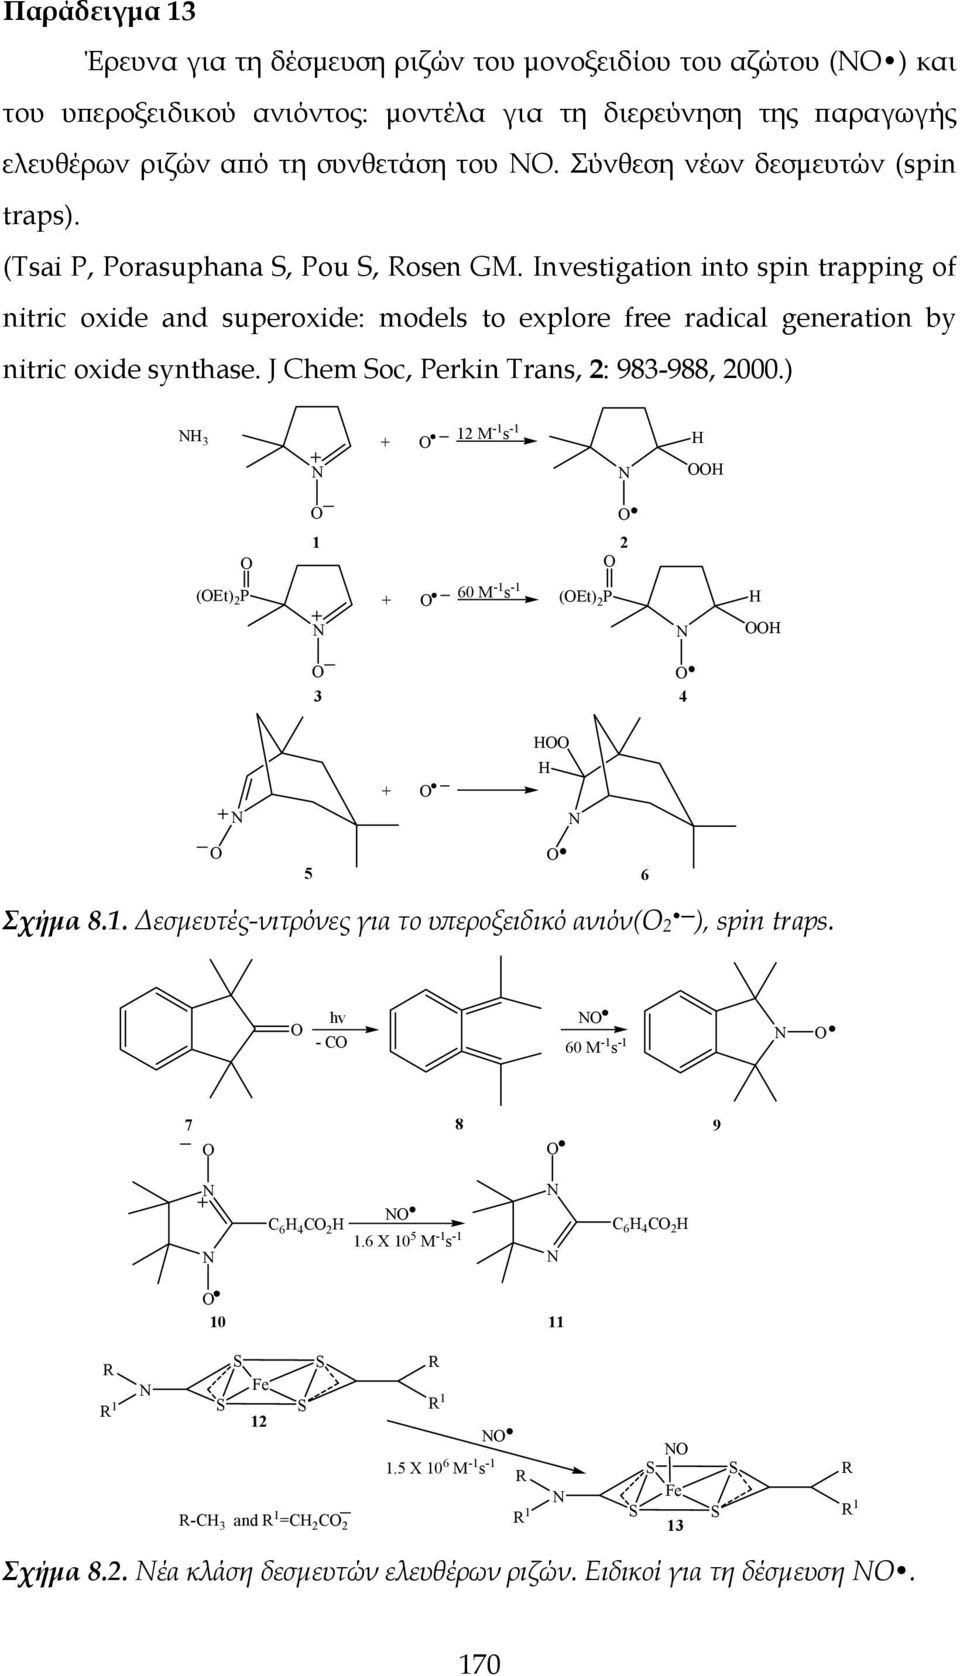 Investigation into spin trapping of nitric oxide and superoxide: models to explore free radical generation by nitric oxide synthase. J Chem Soc, Perkin Trans, 2: 983-988, 2000.